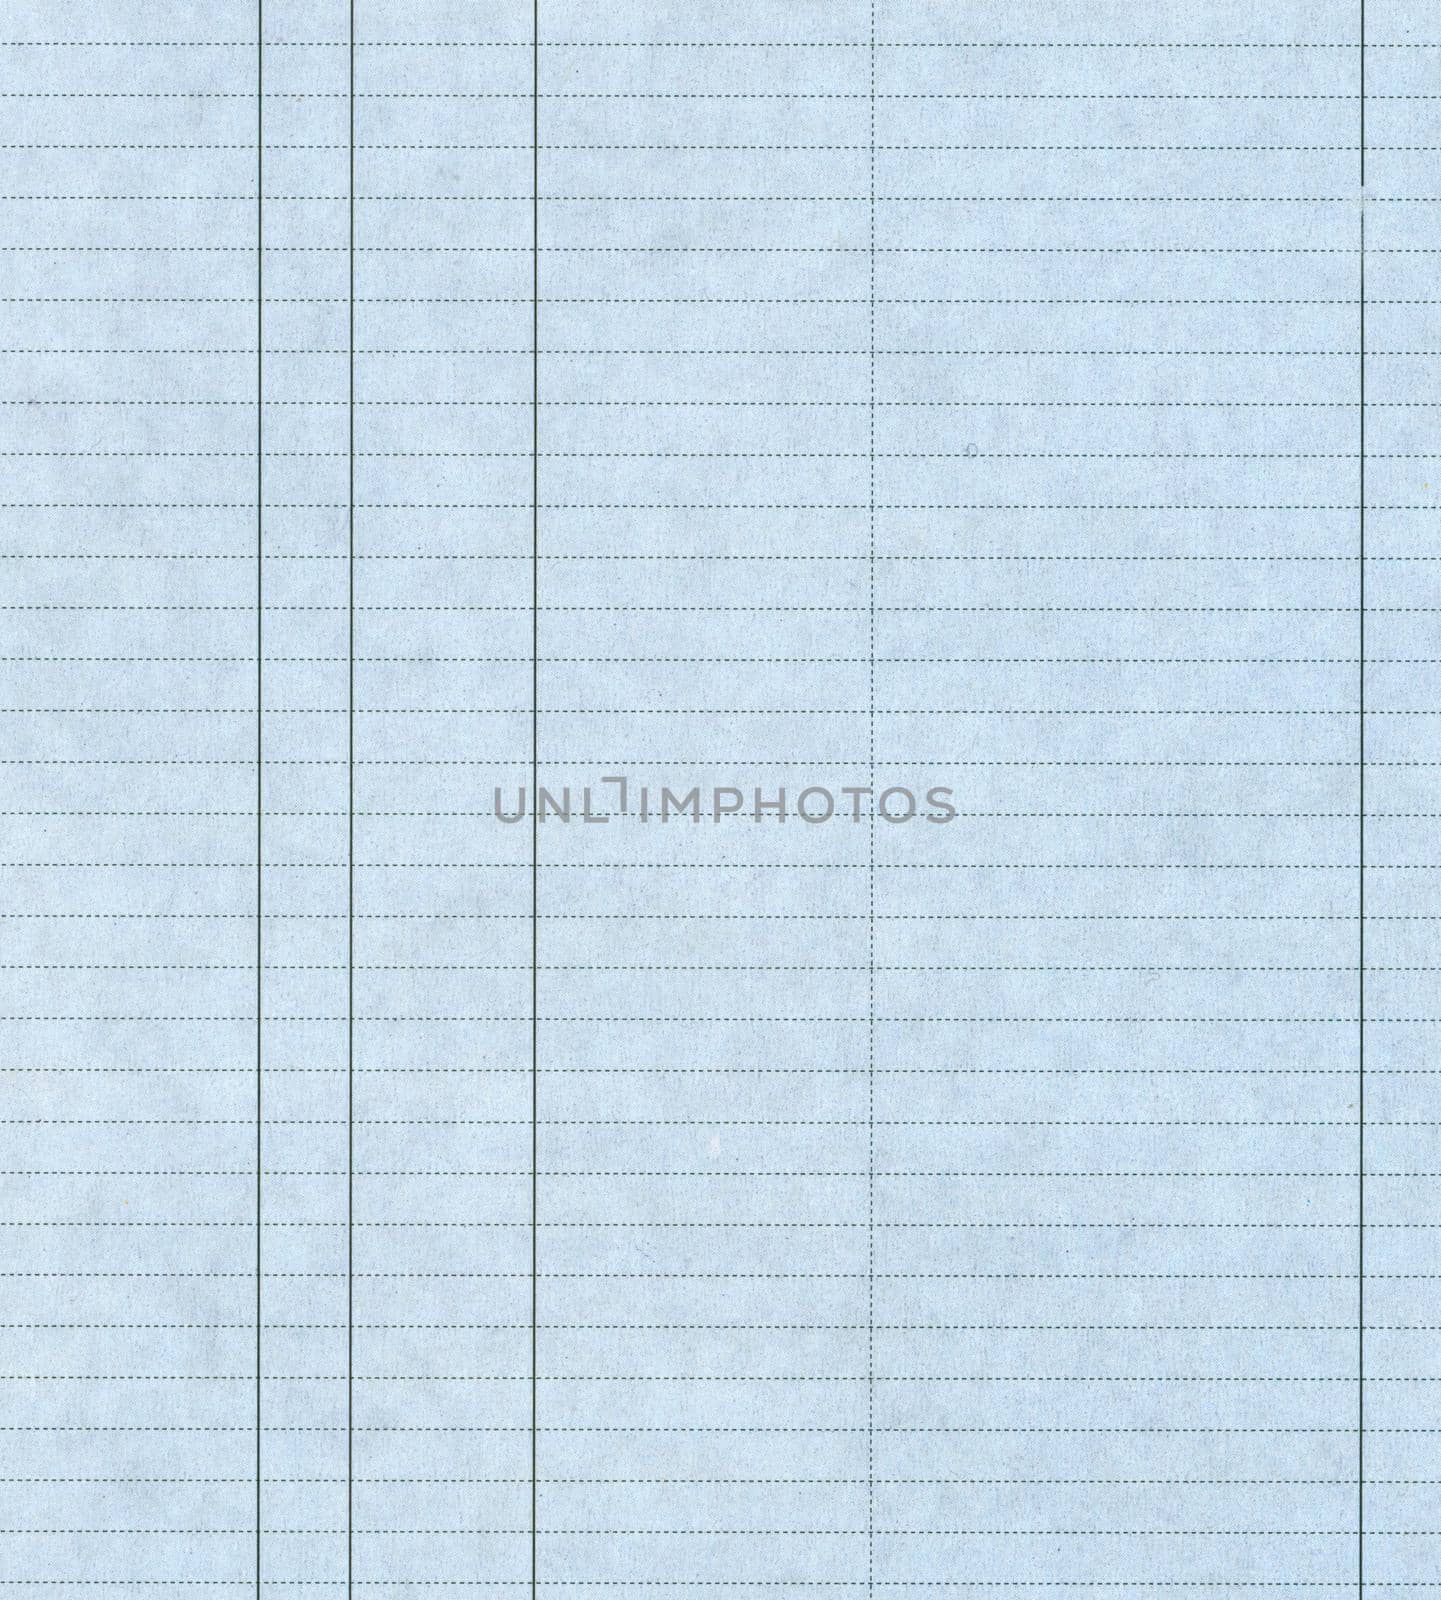 Blank paper form with light blue cells